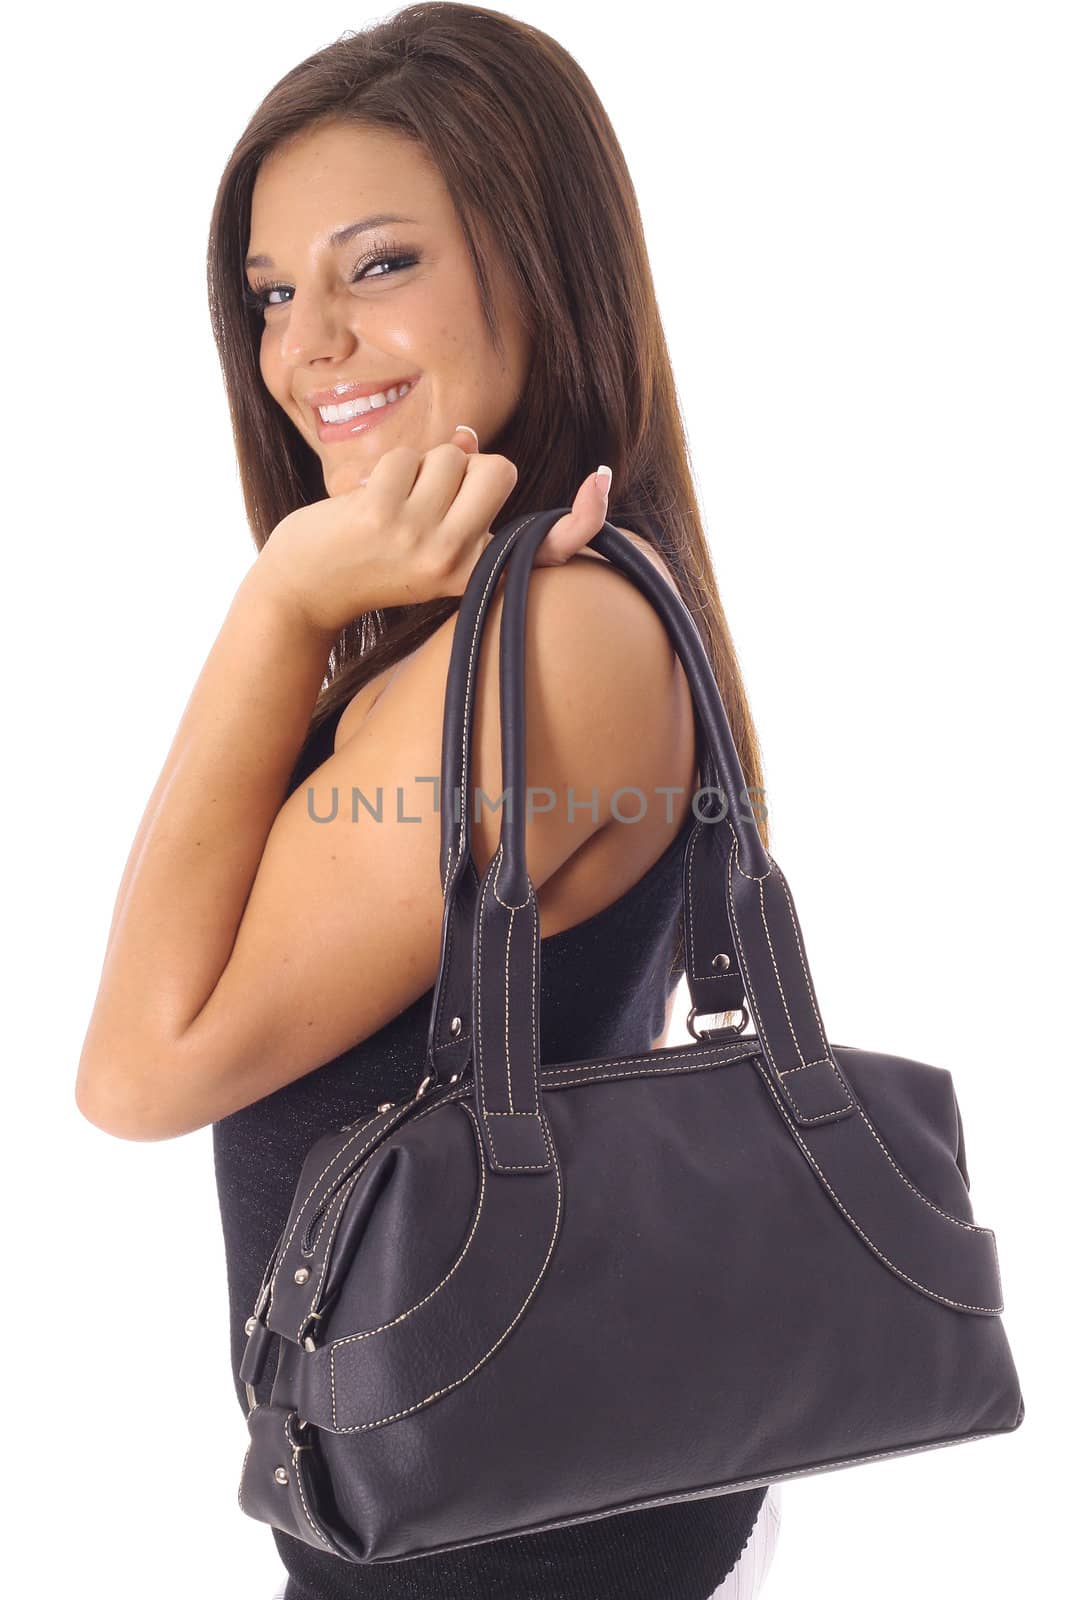 happy model with purse by creativestock